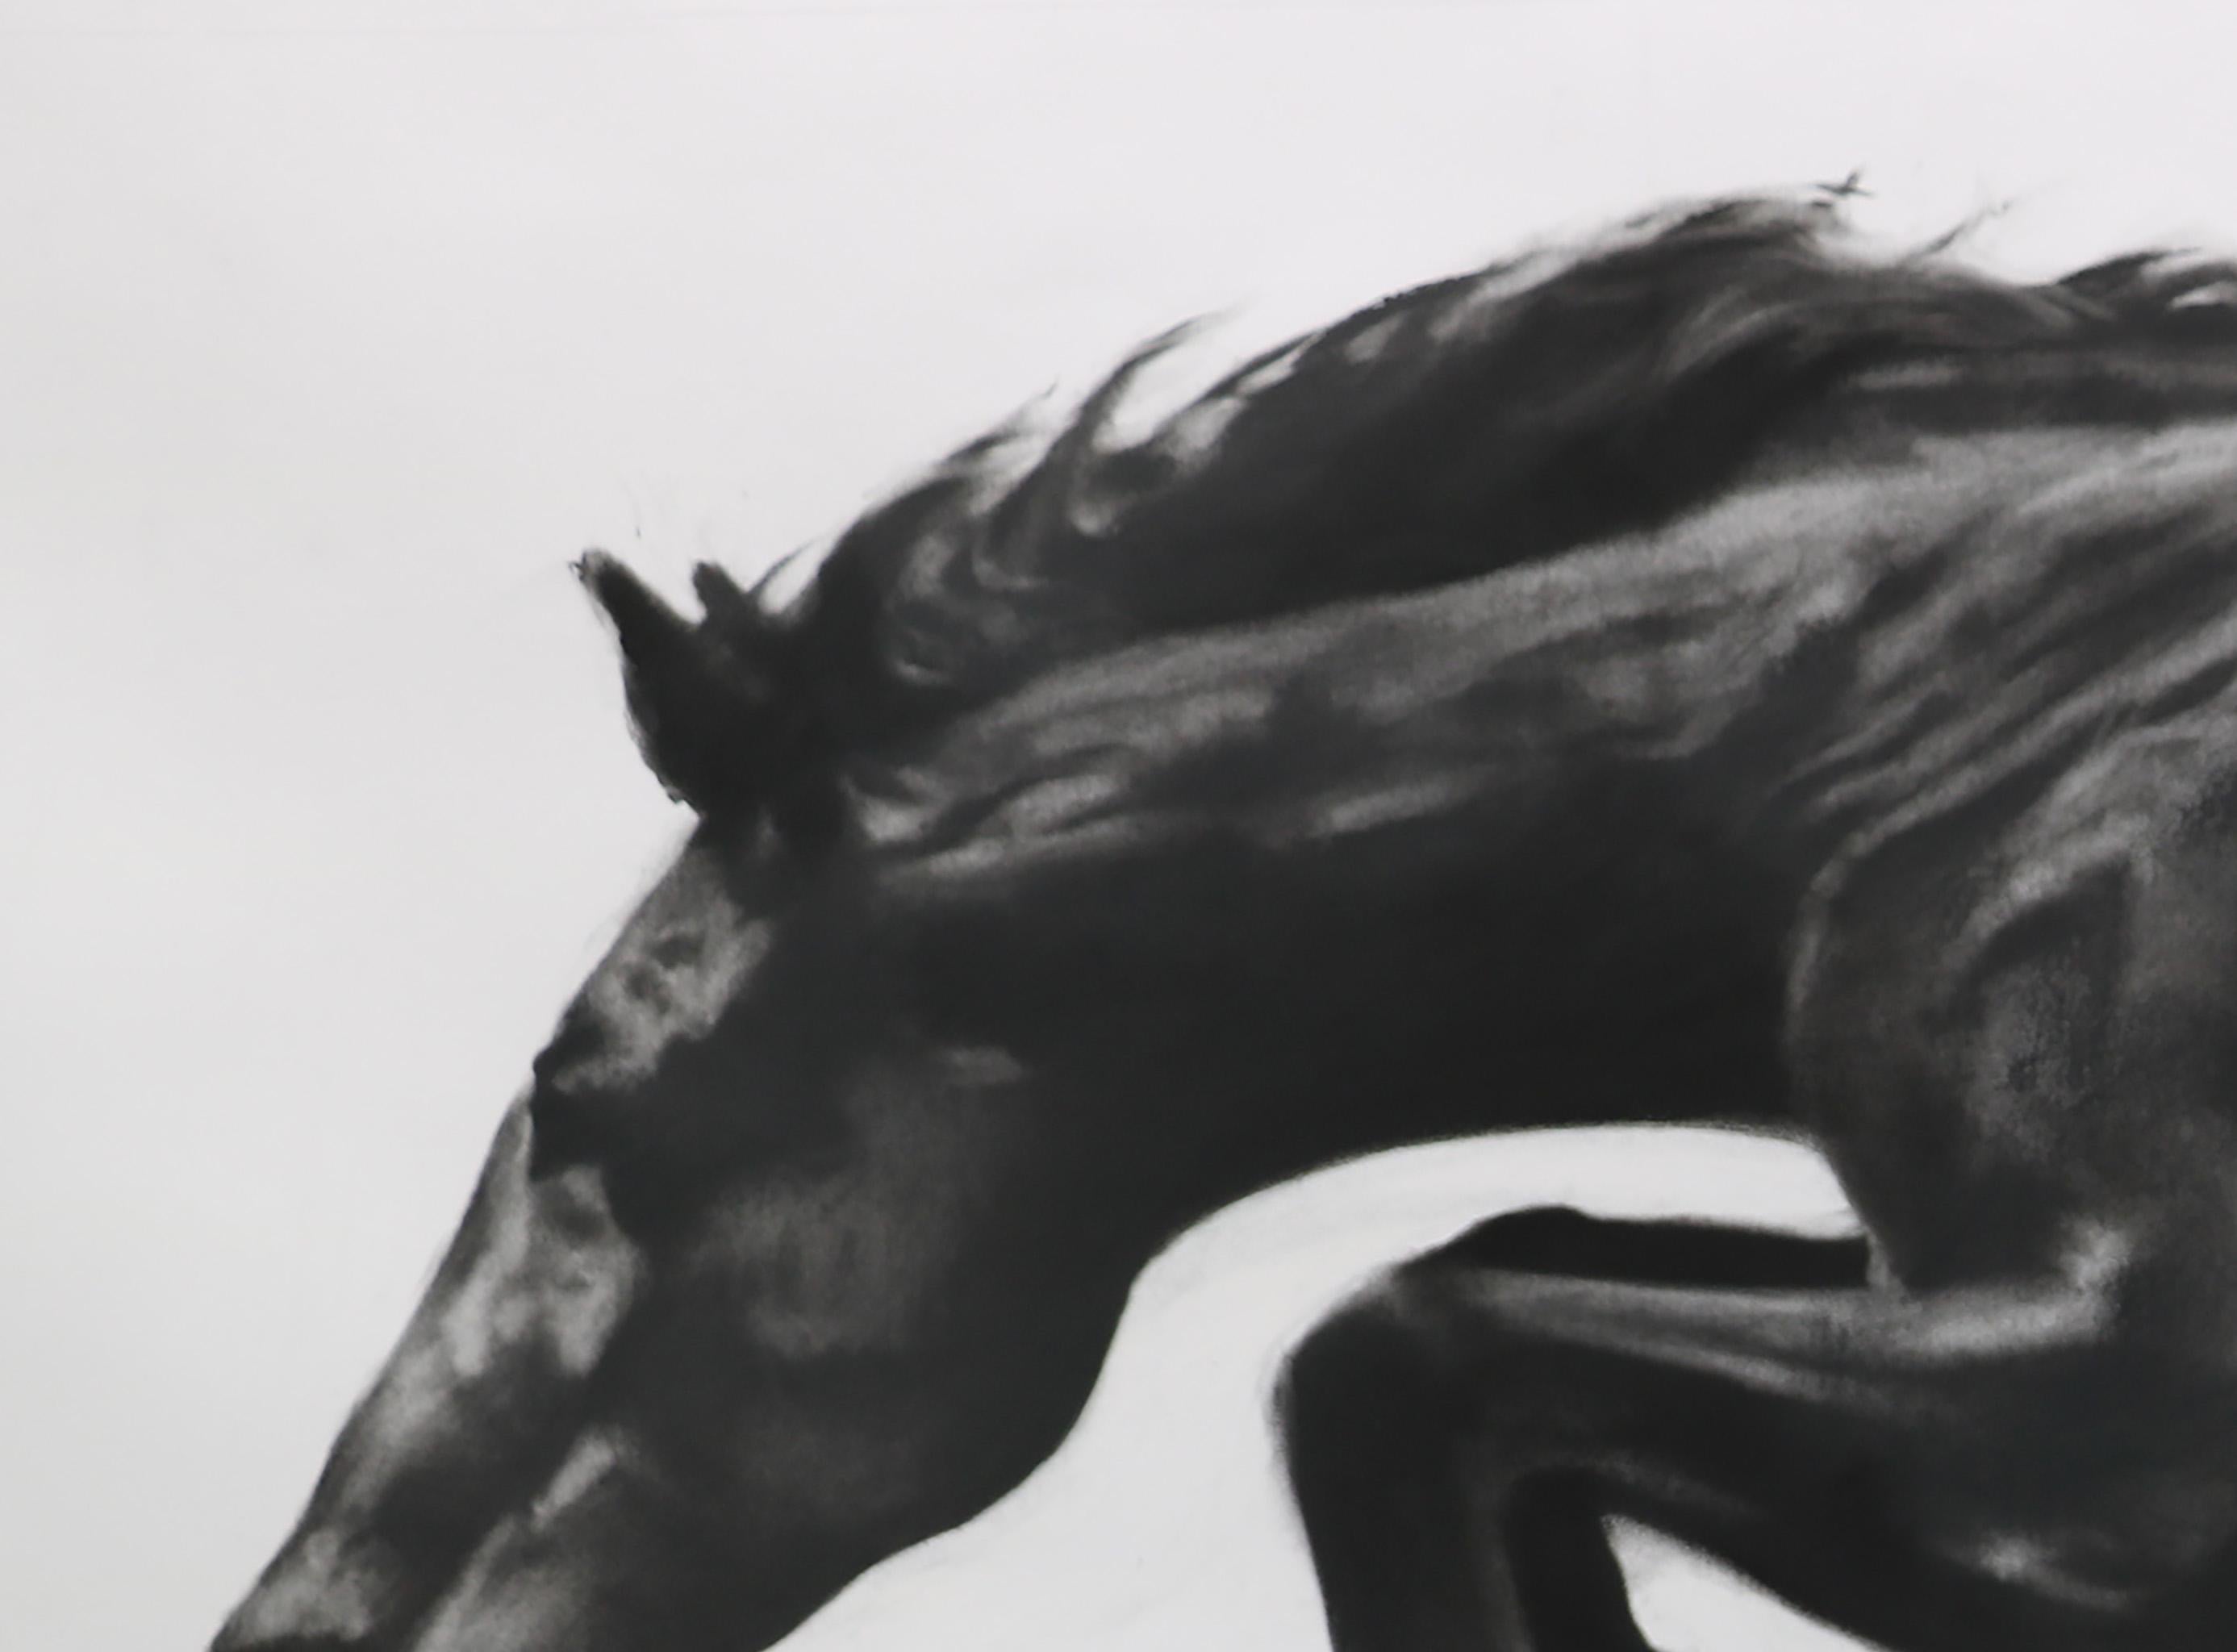 This is a dynamic and unique charcoal on paper, framed on a beautiful custom white box frame - all archival materials. The painting perfectly captures the movement of the horse and the monochromatic palette makes this a stunning contemporary